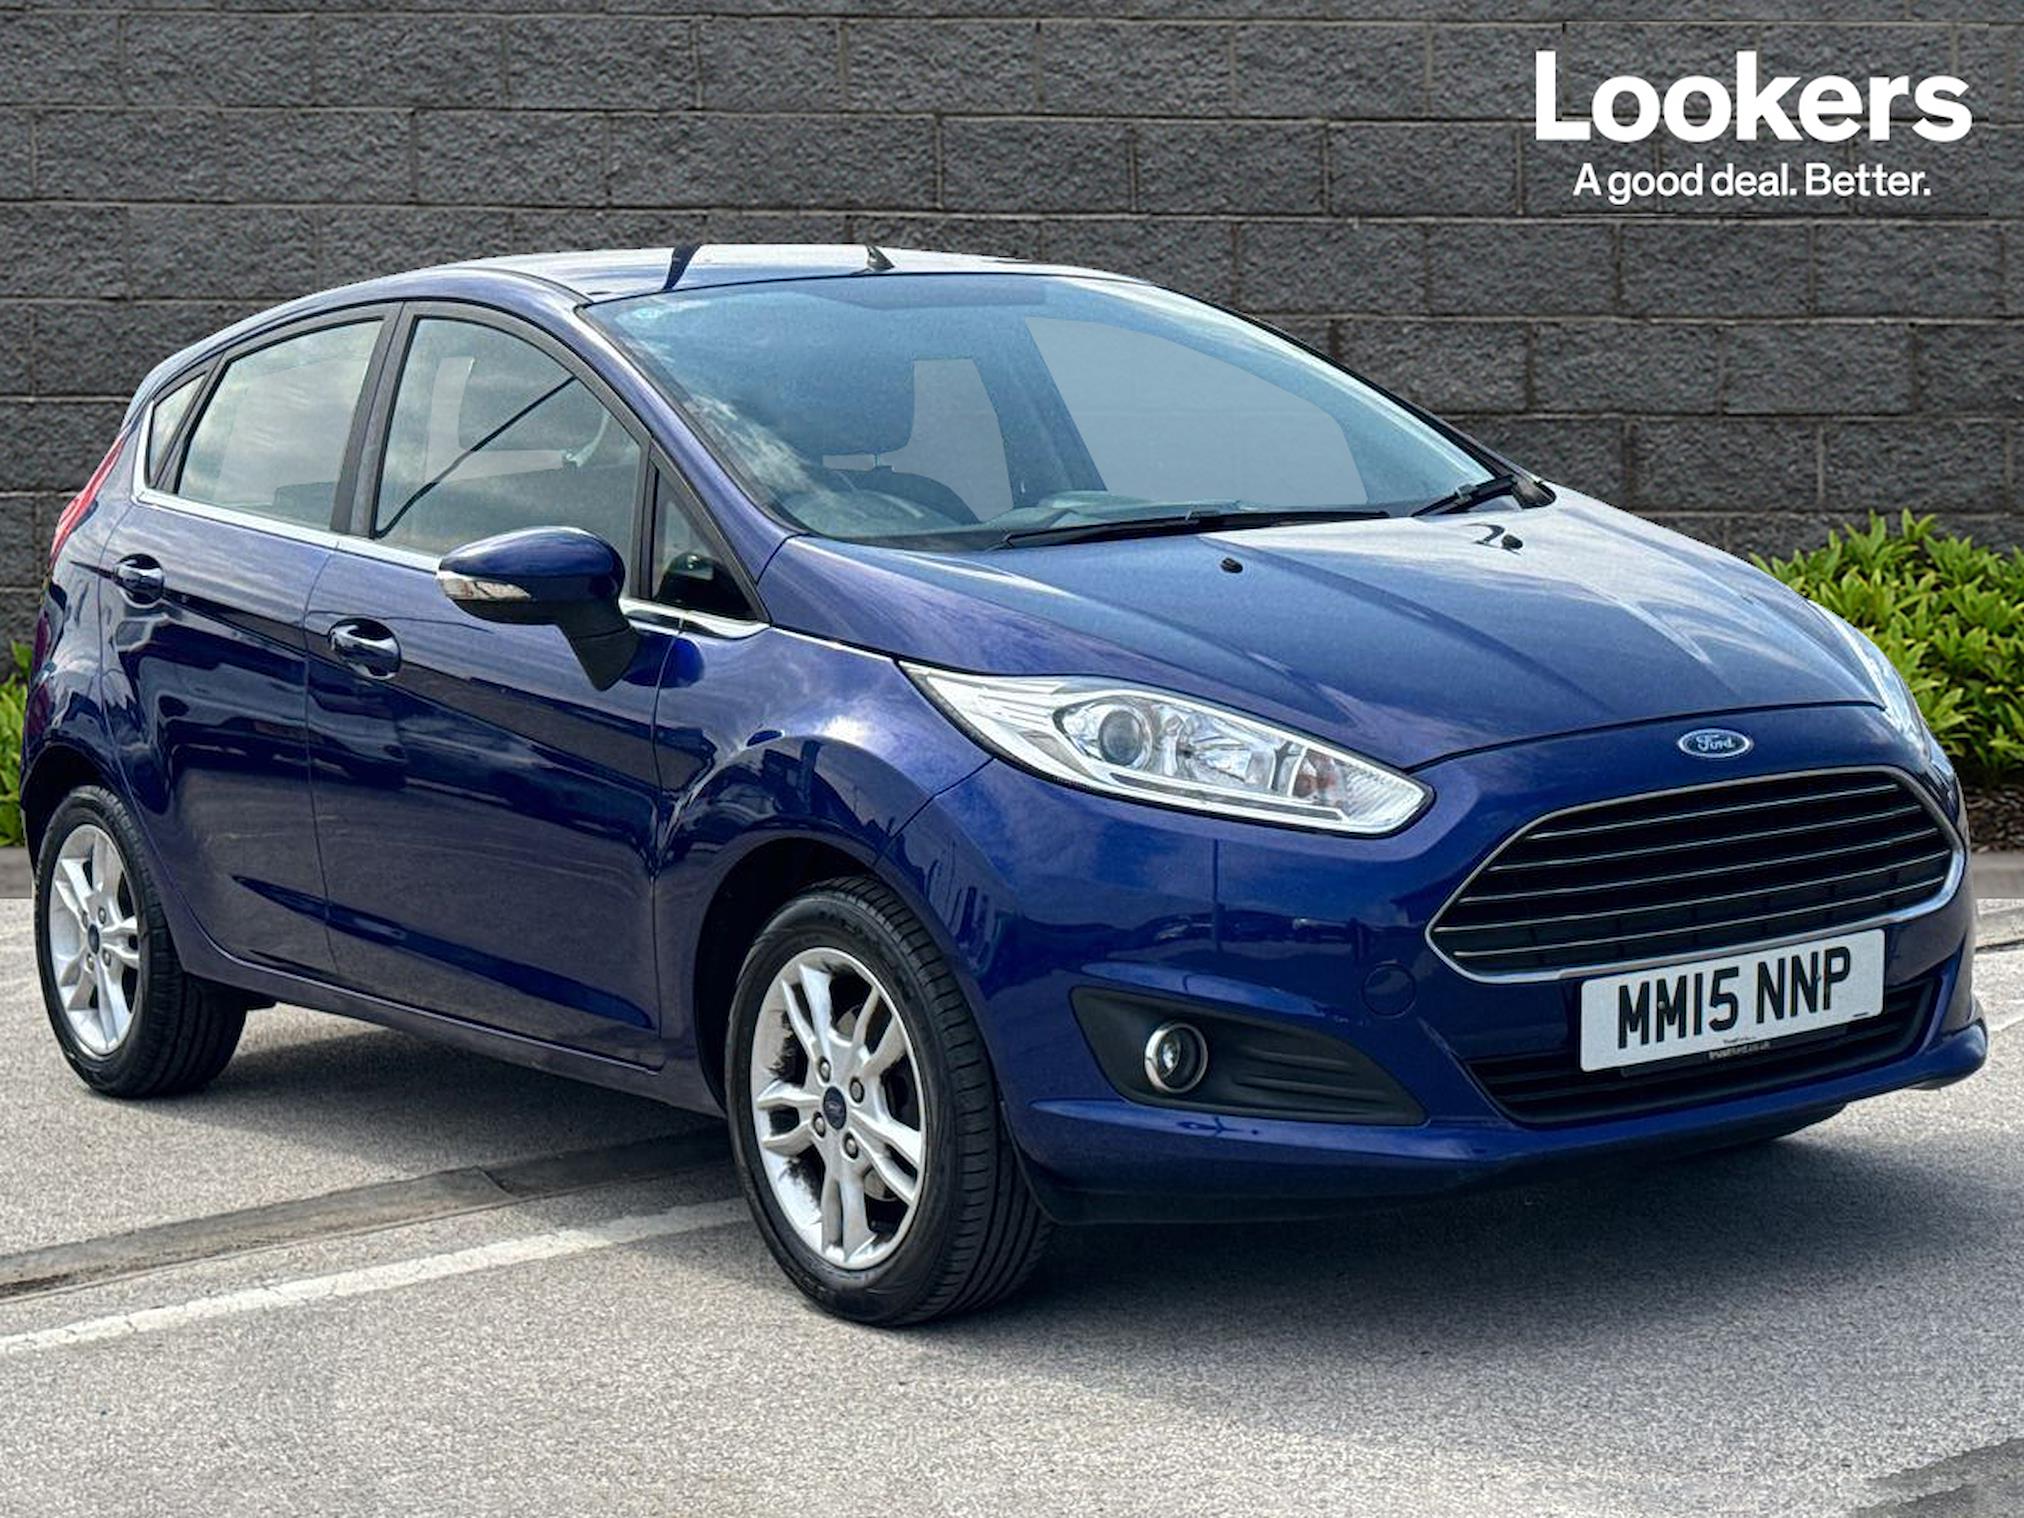 Used FORD FIESTA 1.25 82 Zetec 5Dr 2015